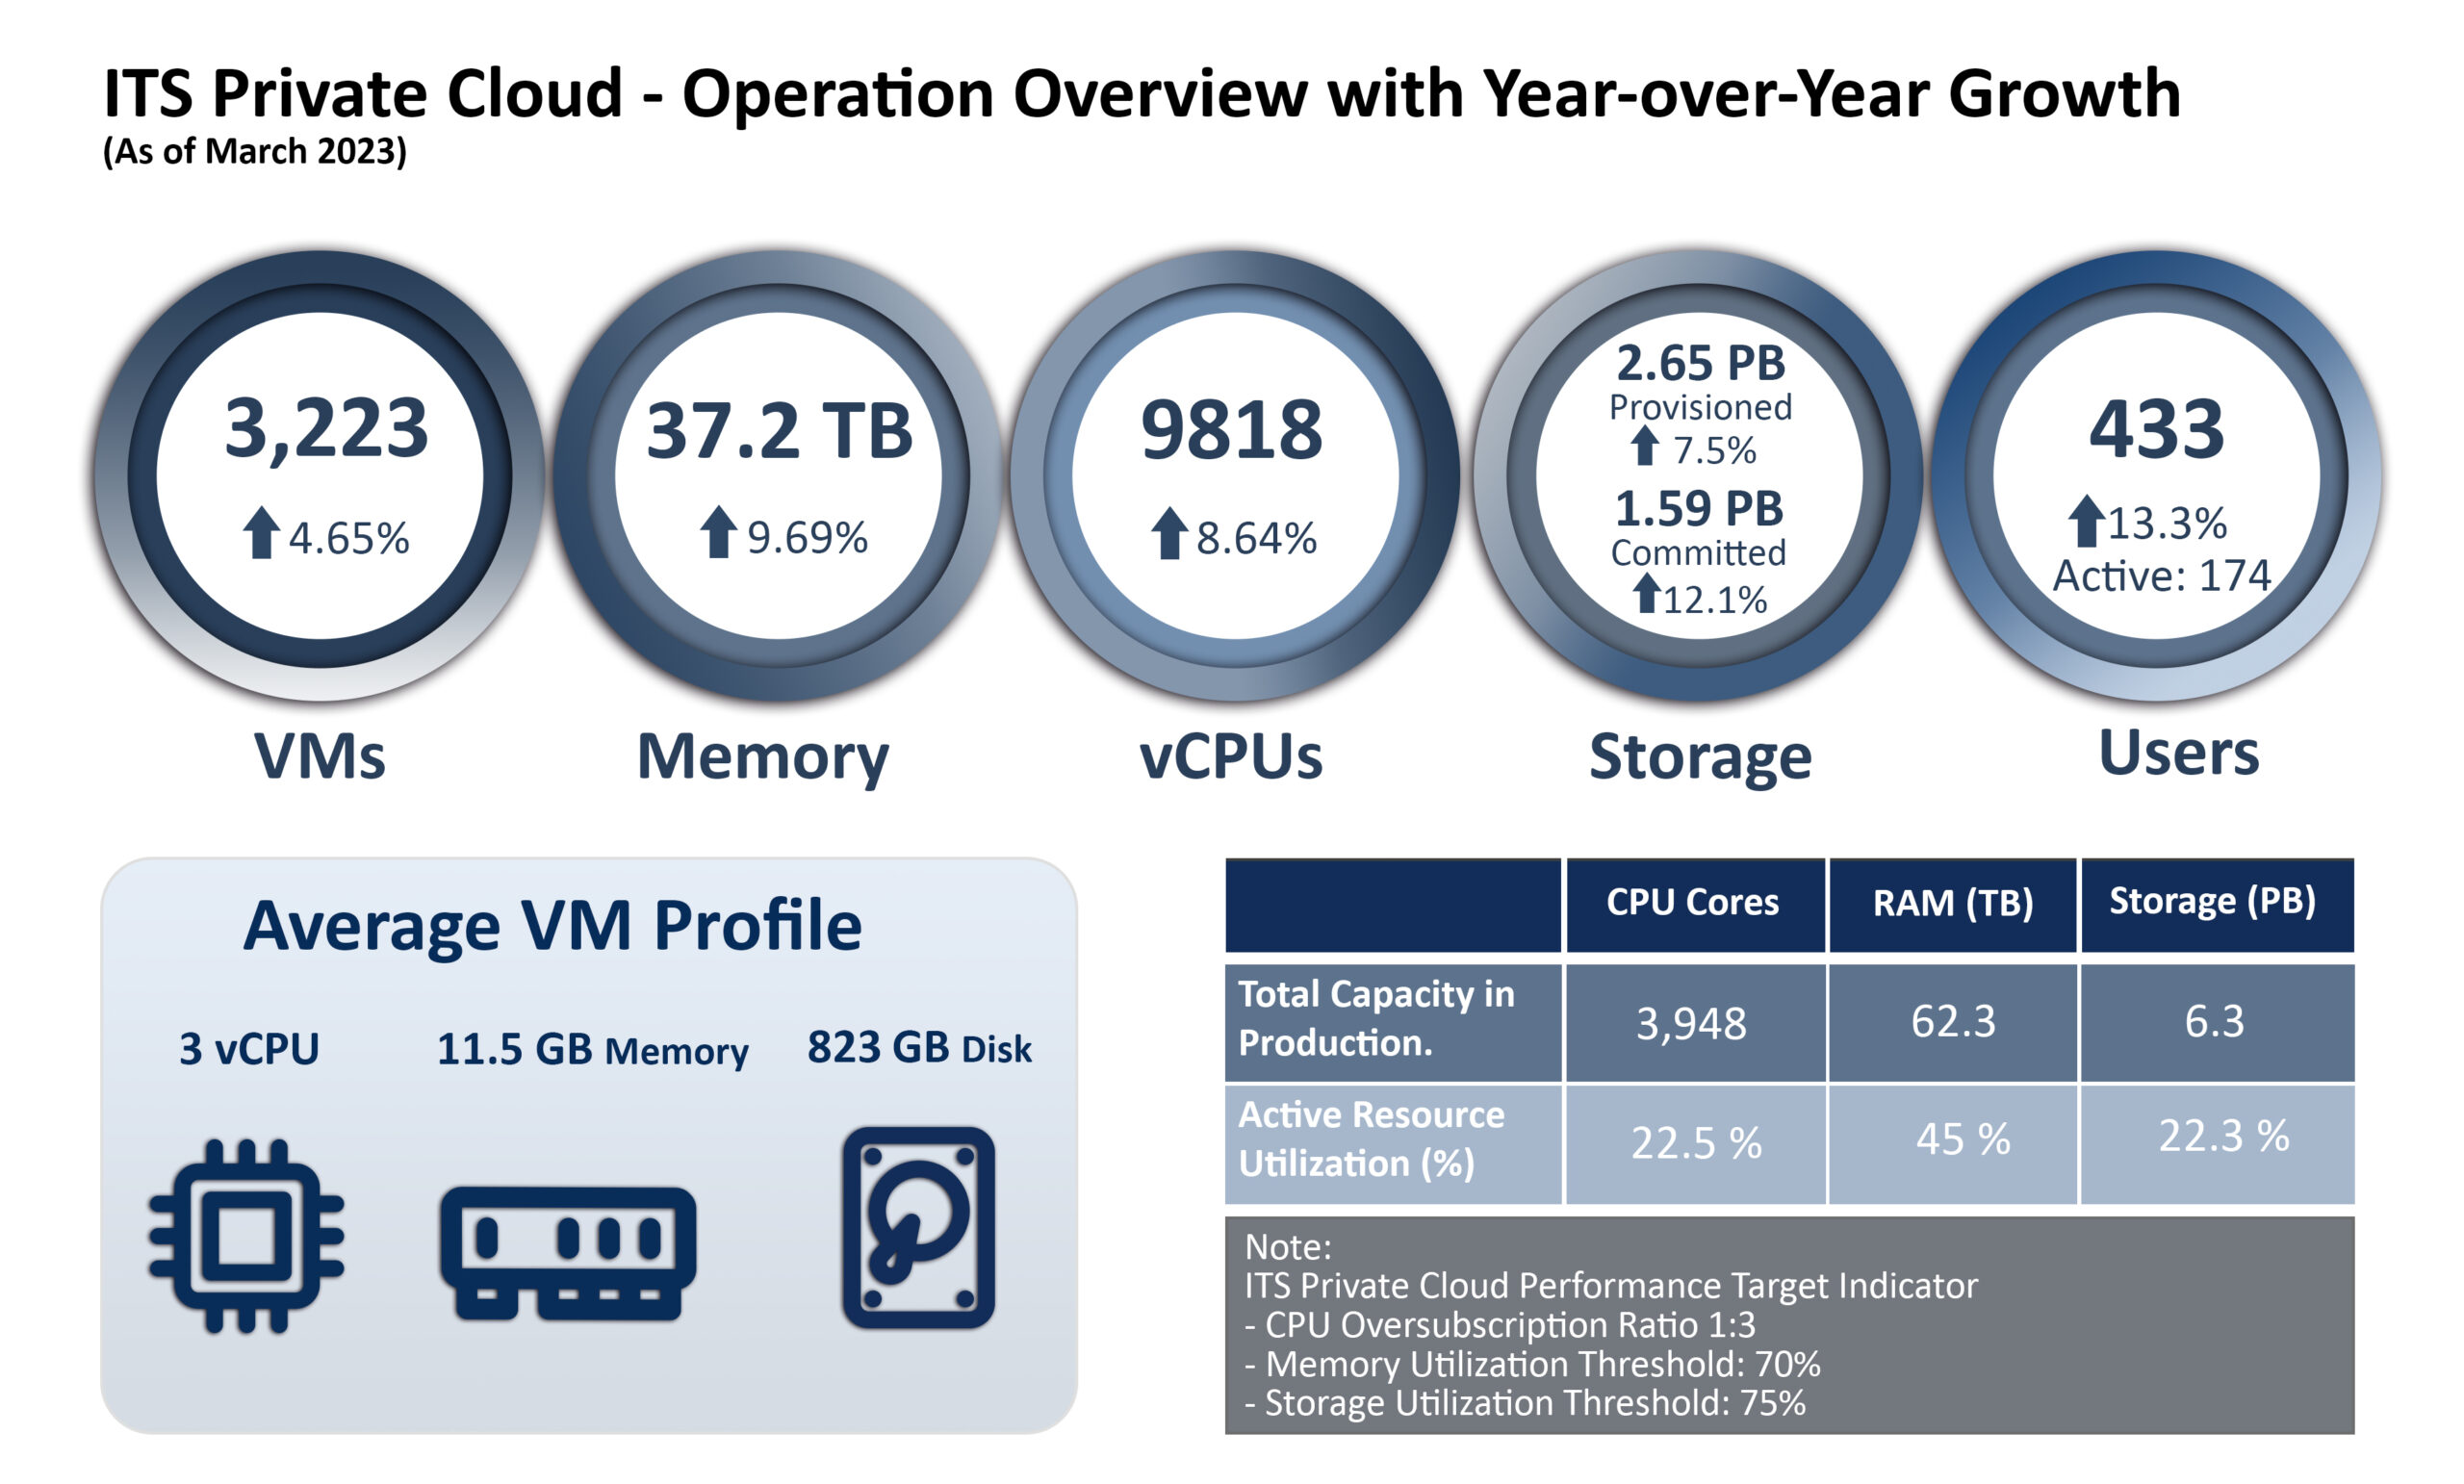 ITS Private Cloud graphic showing year-over-year growth